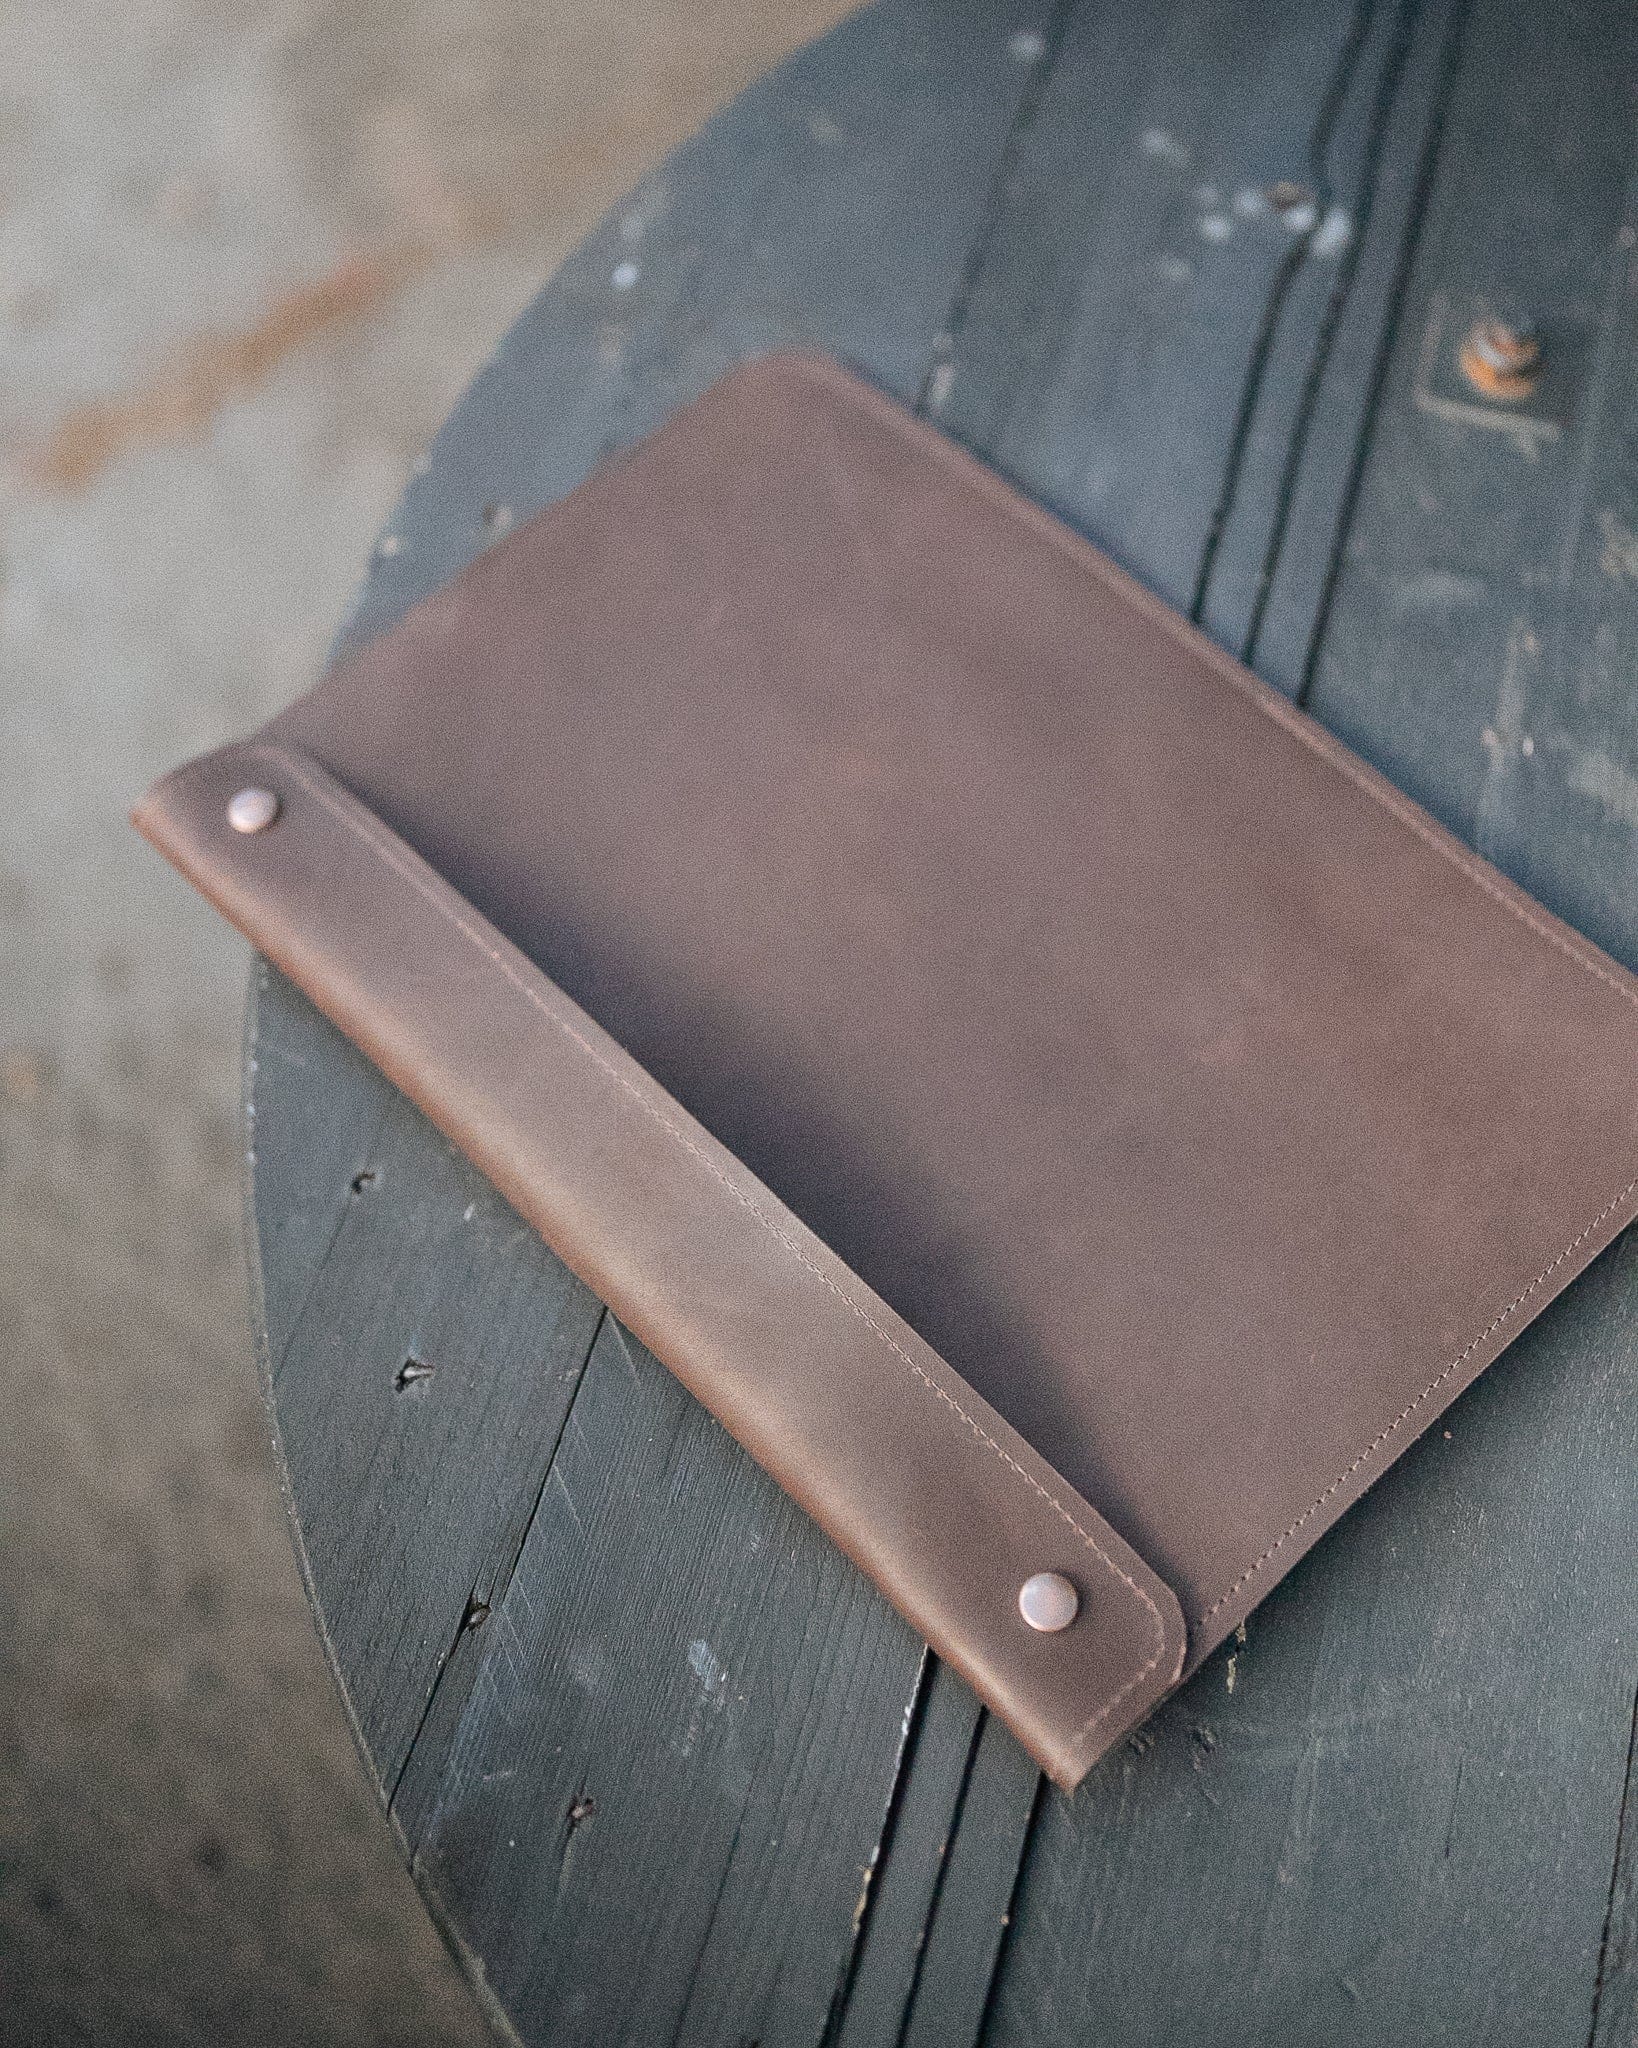 The Real McCaul Leathergoods Computer Accessories Dark Brown / Dark Sleeve Case for Tablet/Laptop - 15” - Horizontal Australian Made Australian Owned